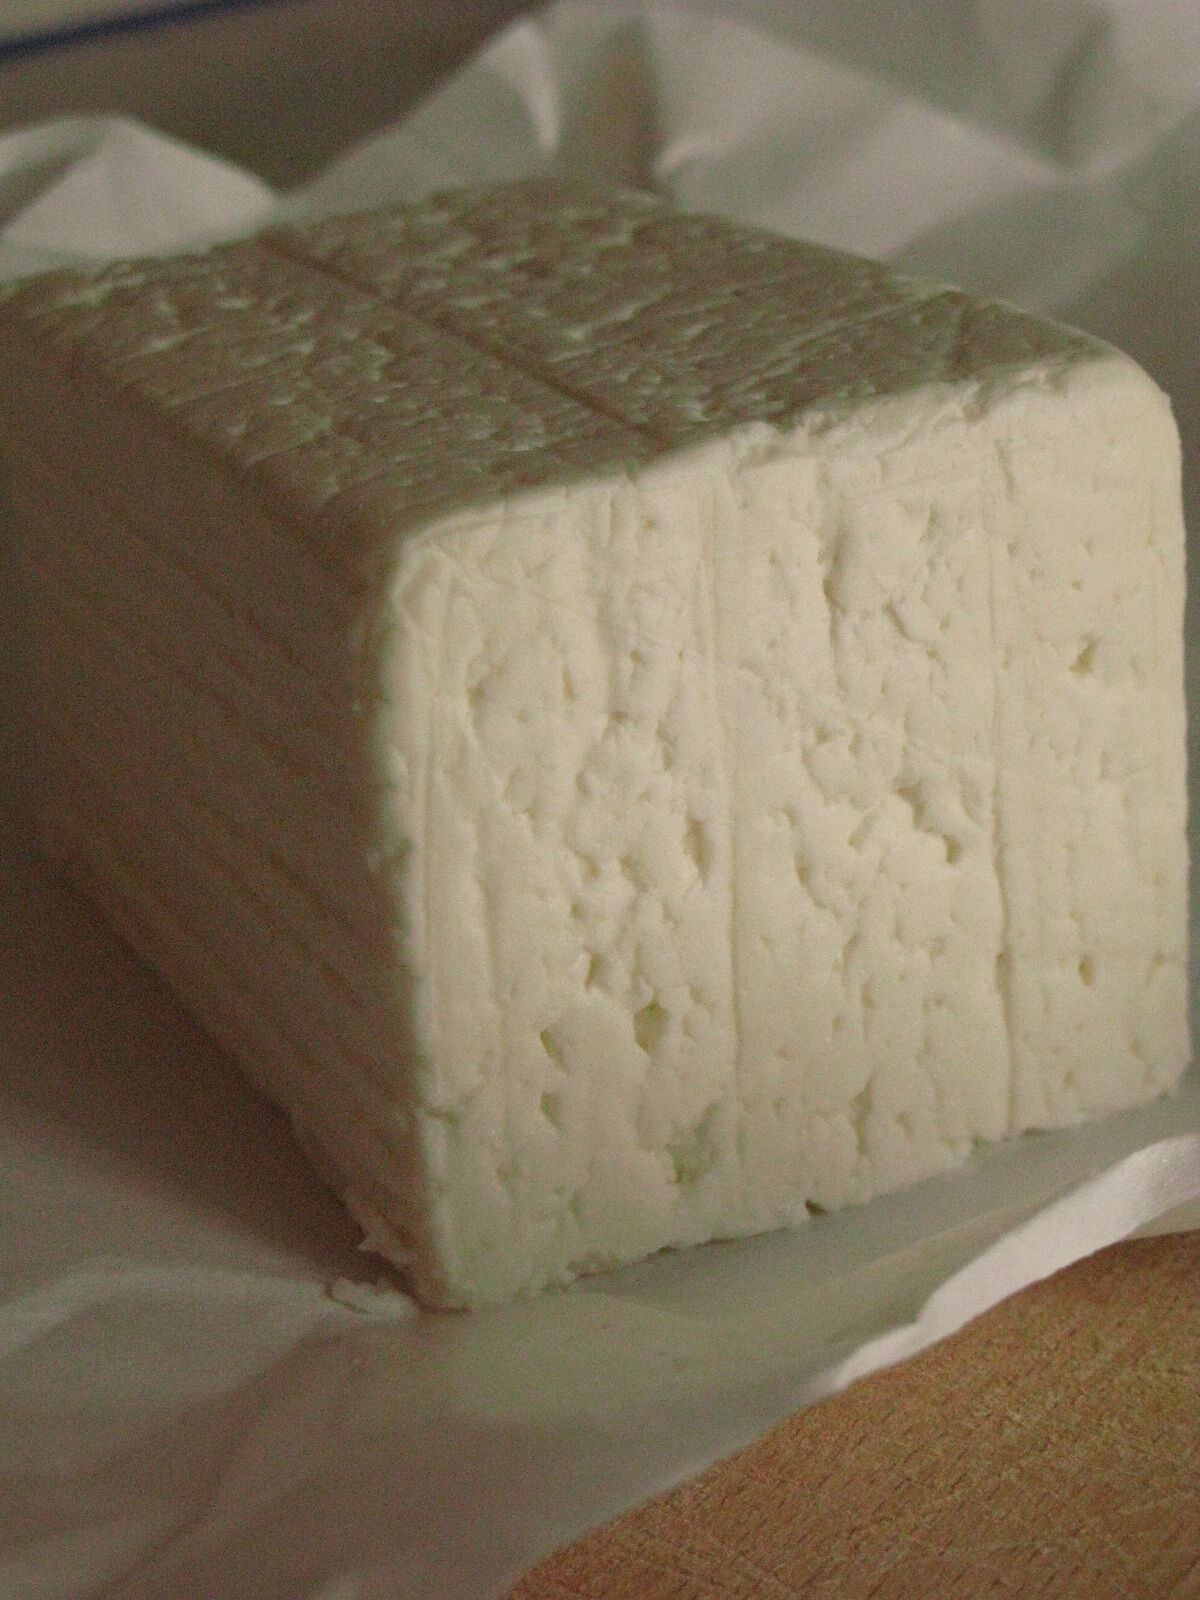 List of cheesemakers - Wikipedia